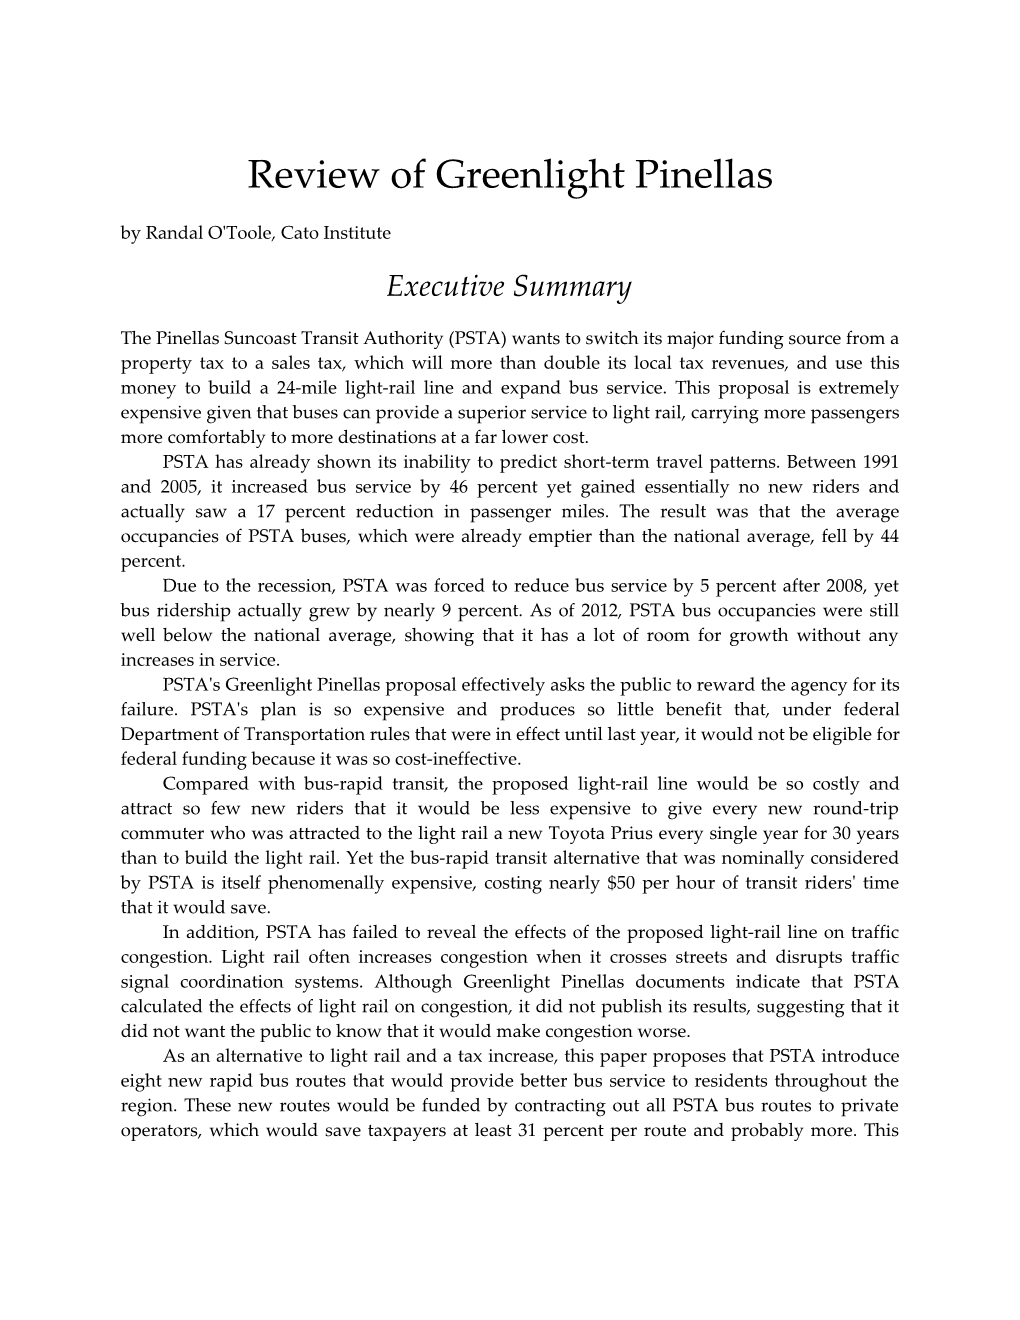 Review of Greenlight Pinellas